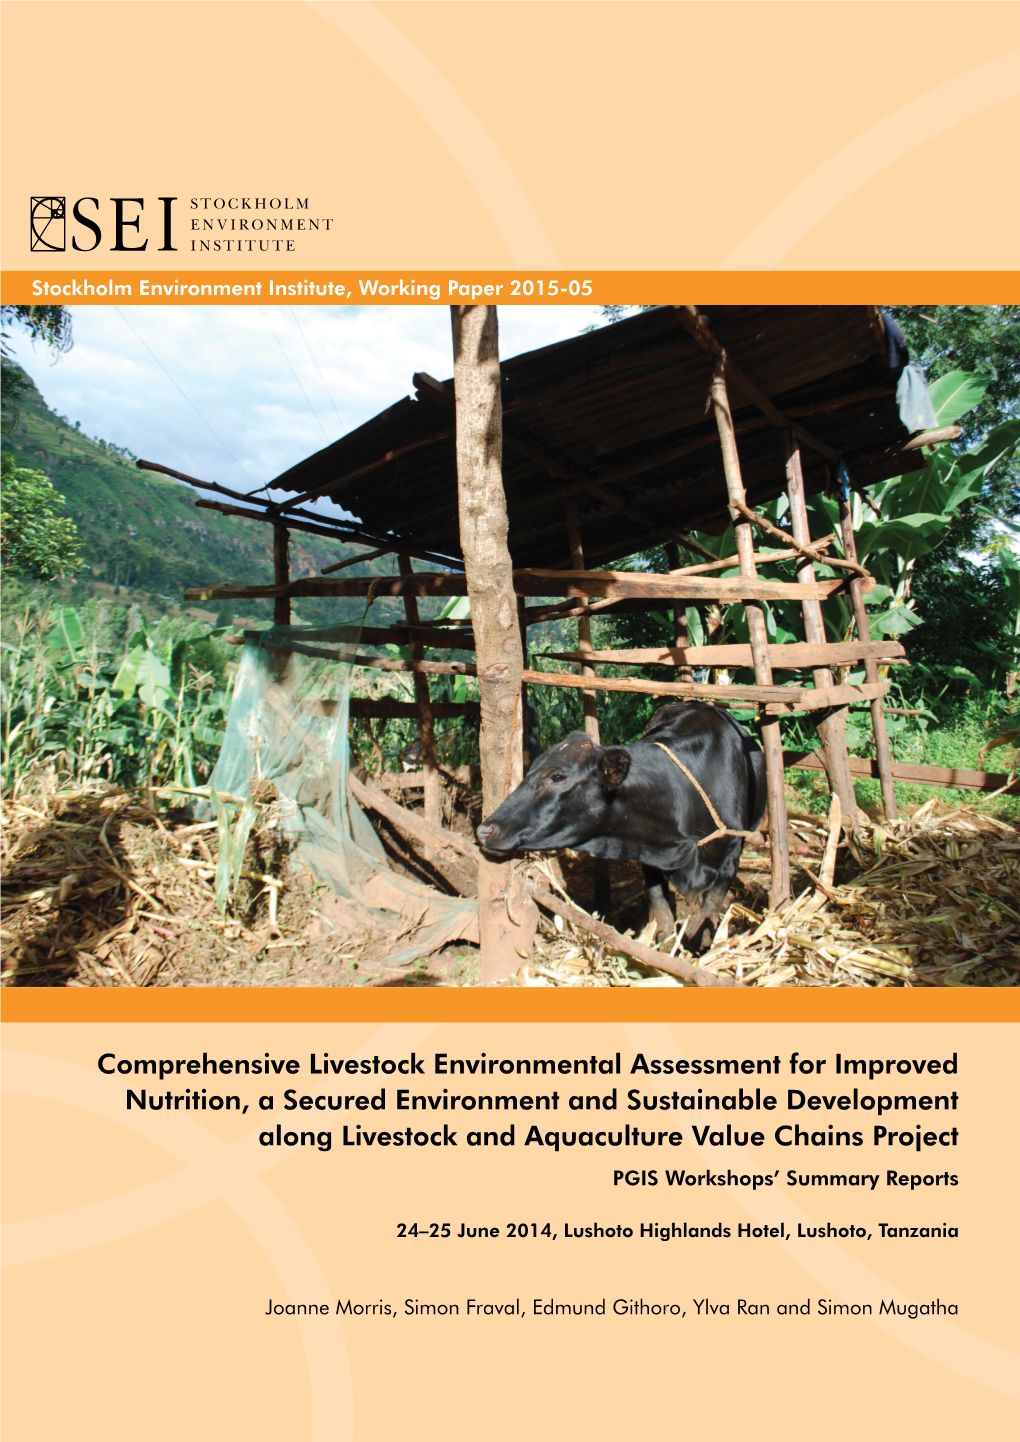 Comprehensive Livestock Environmental Assessment for Improved Nutrition, a Secured Environment and Sustainable Development Along